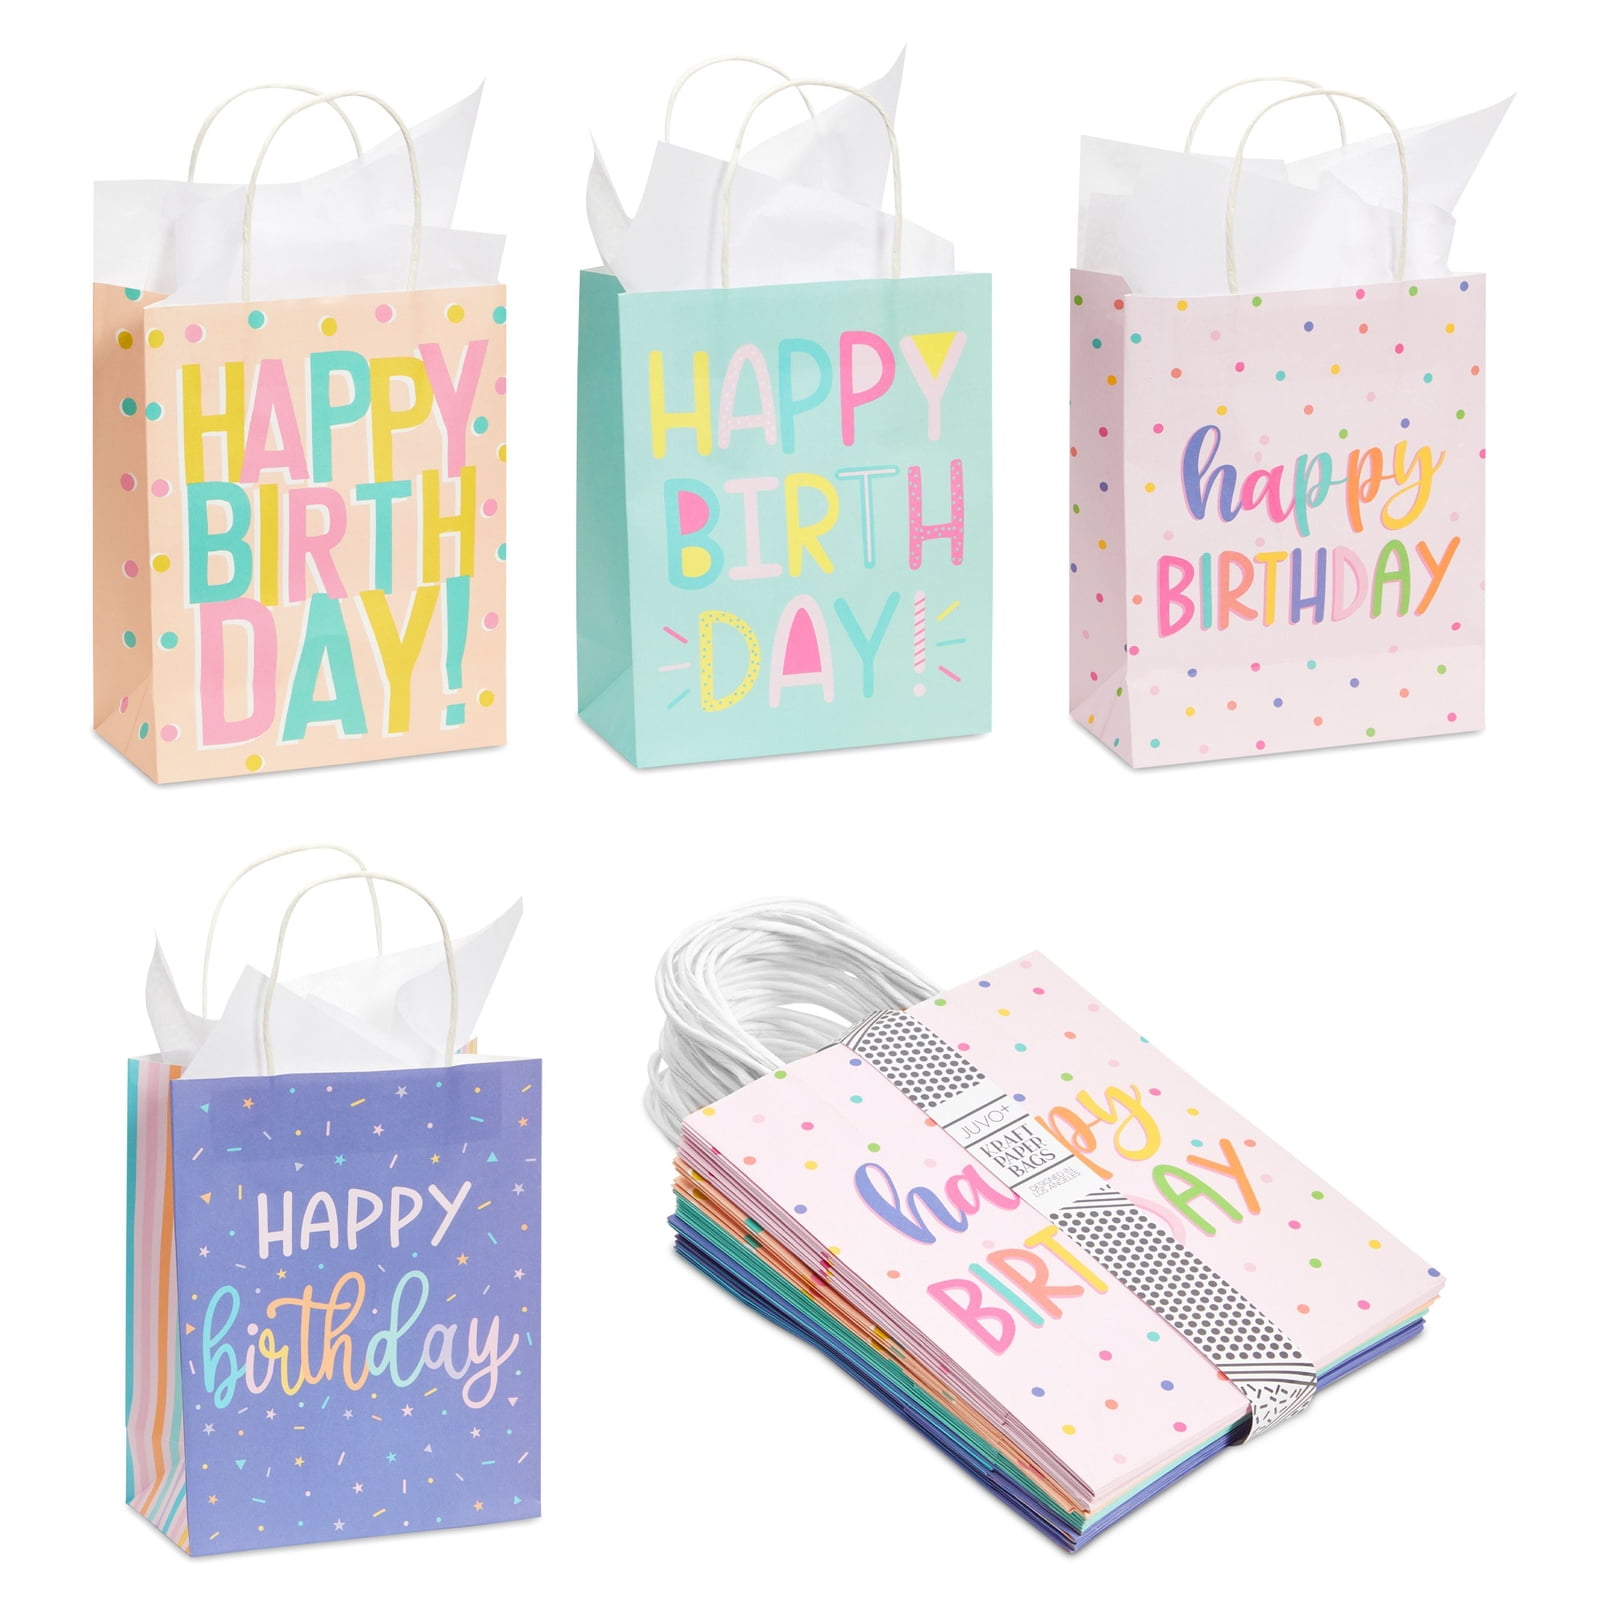 2 Extra Large 3d Happy Birthday Gift Bags for sale online 